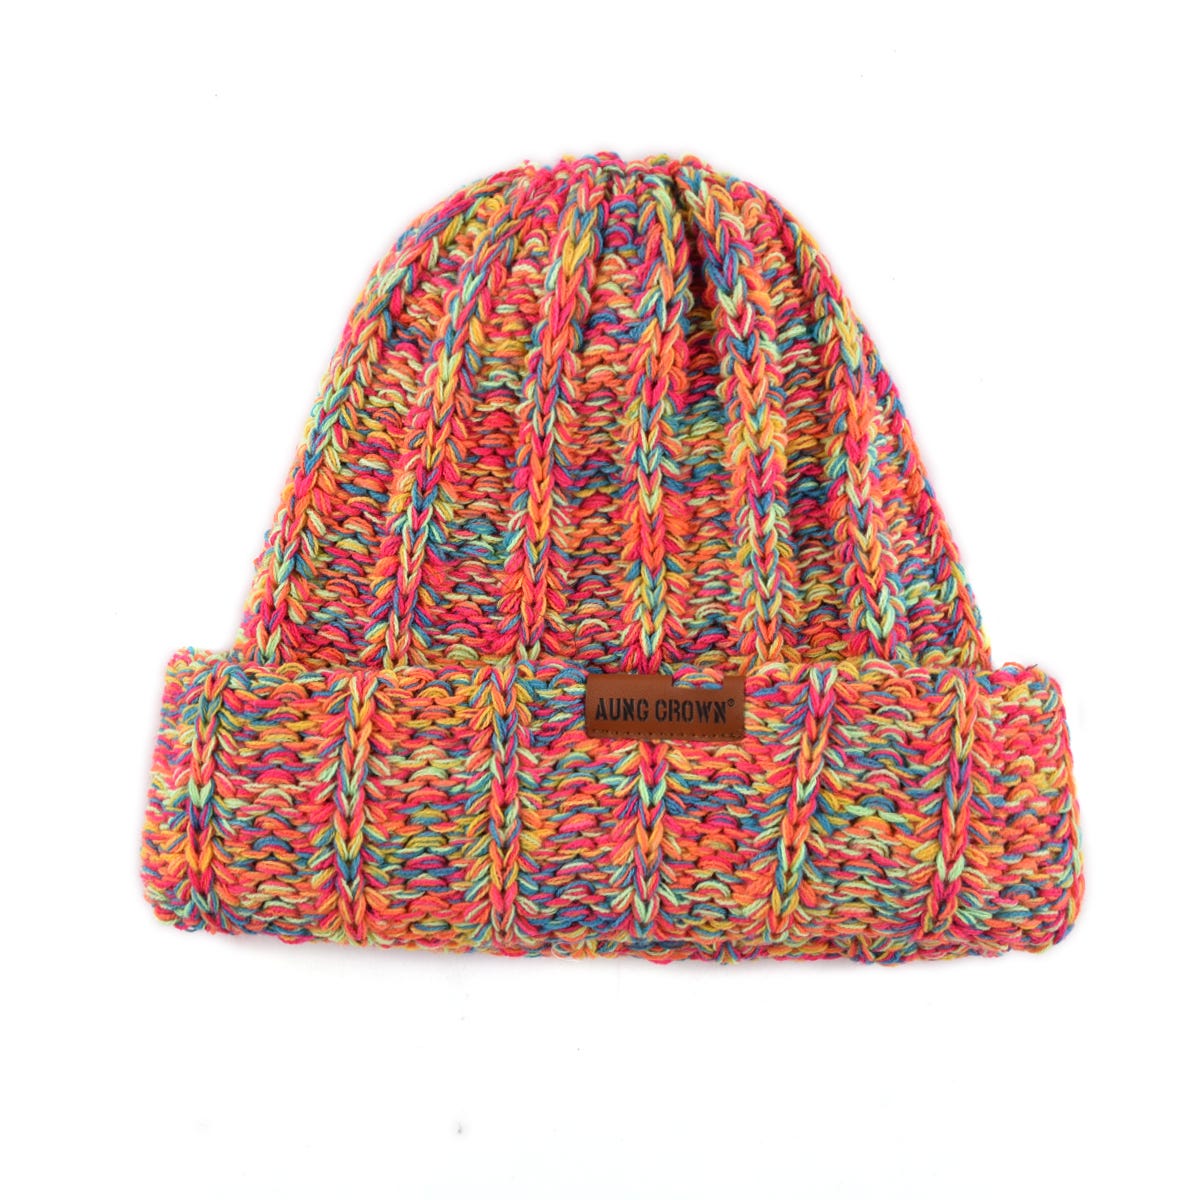 Knit Your Style: A Guide to Selecting the Best Custom Beanie Maker